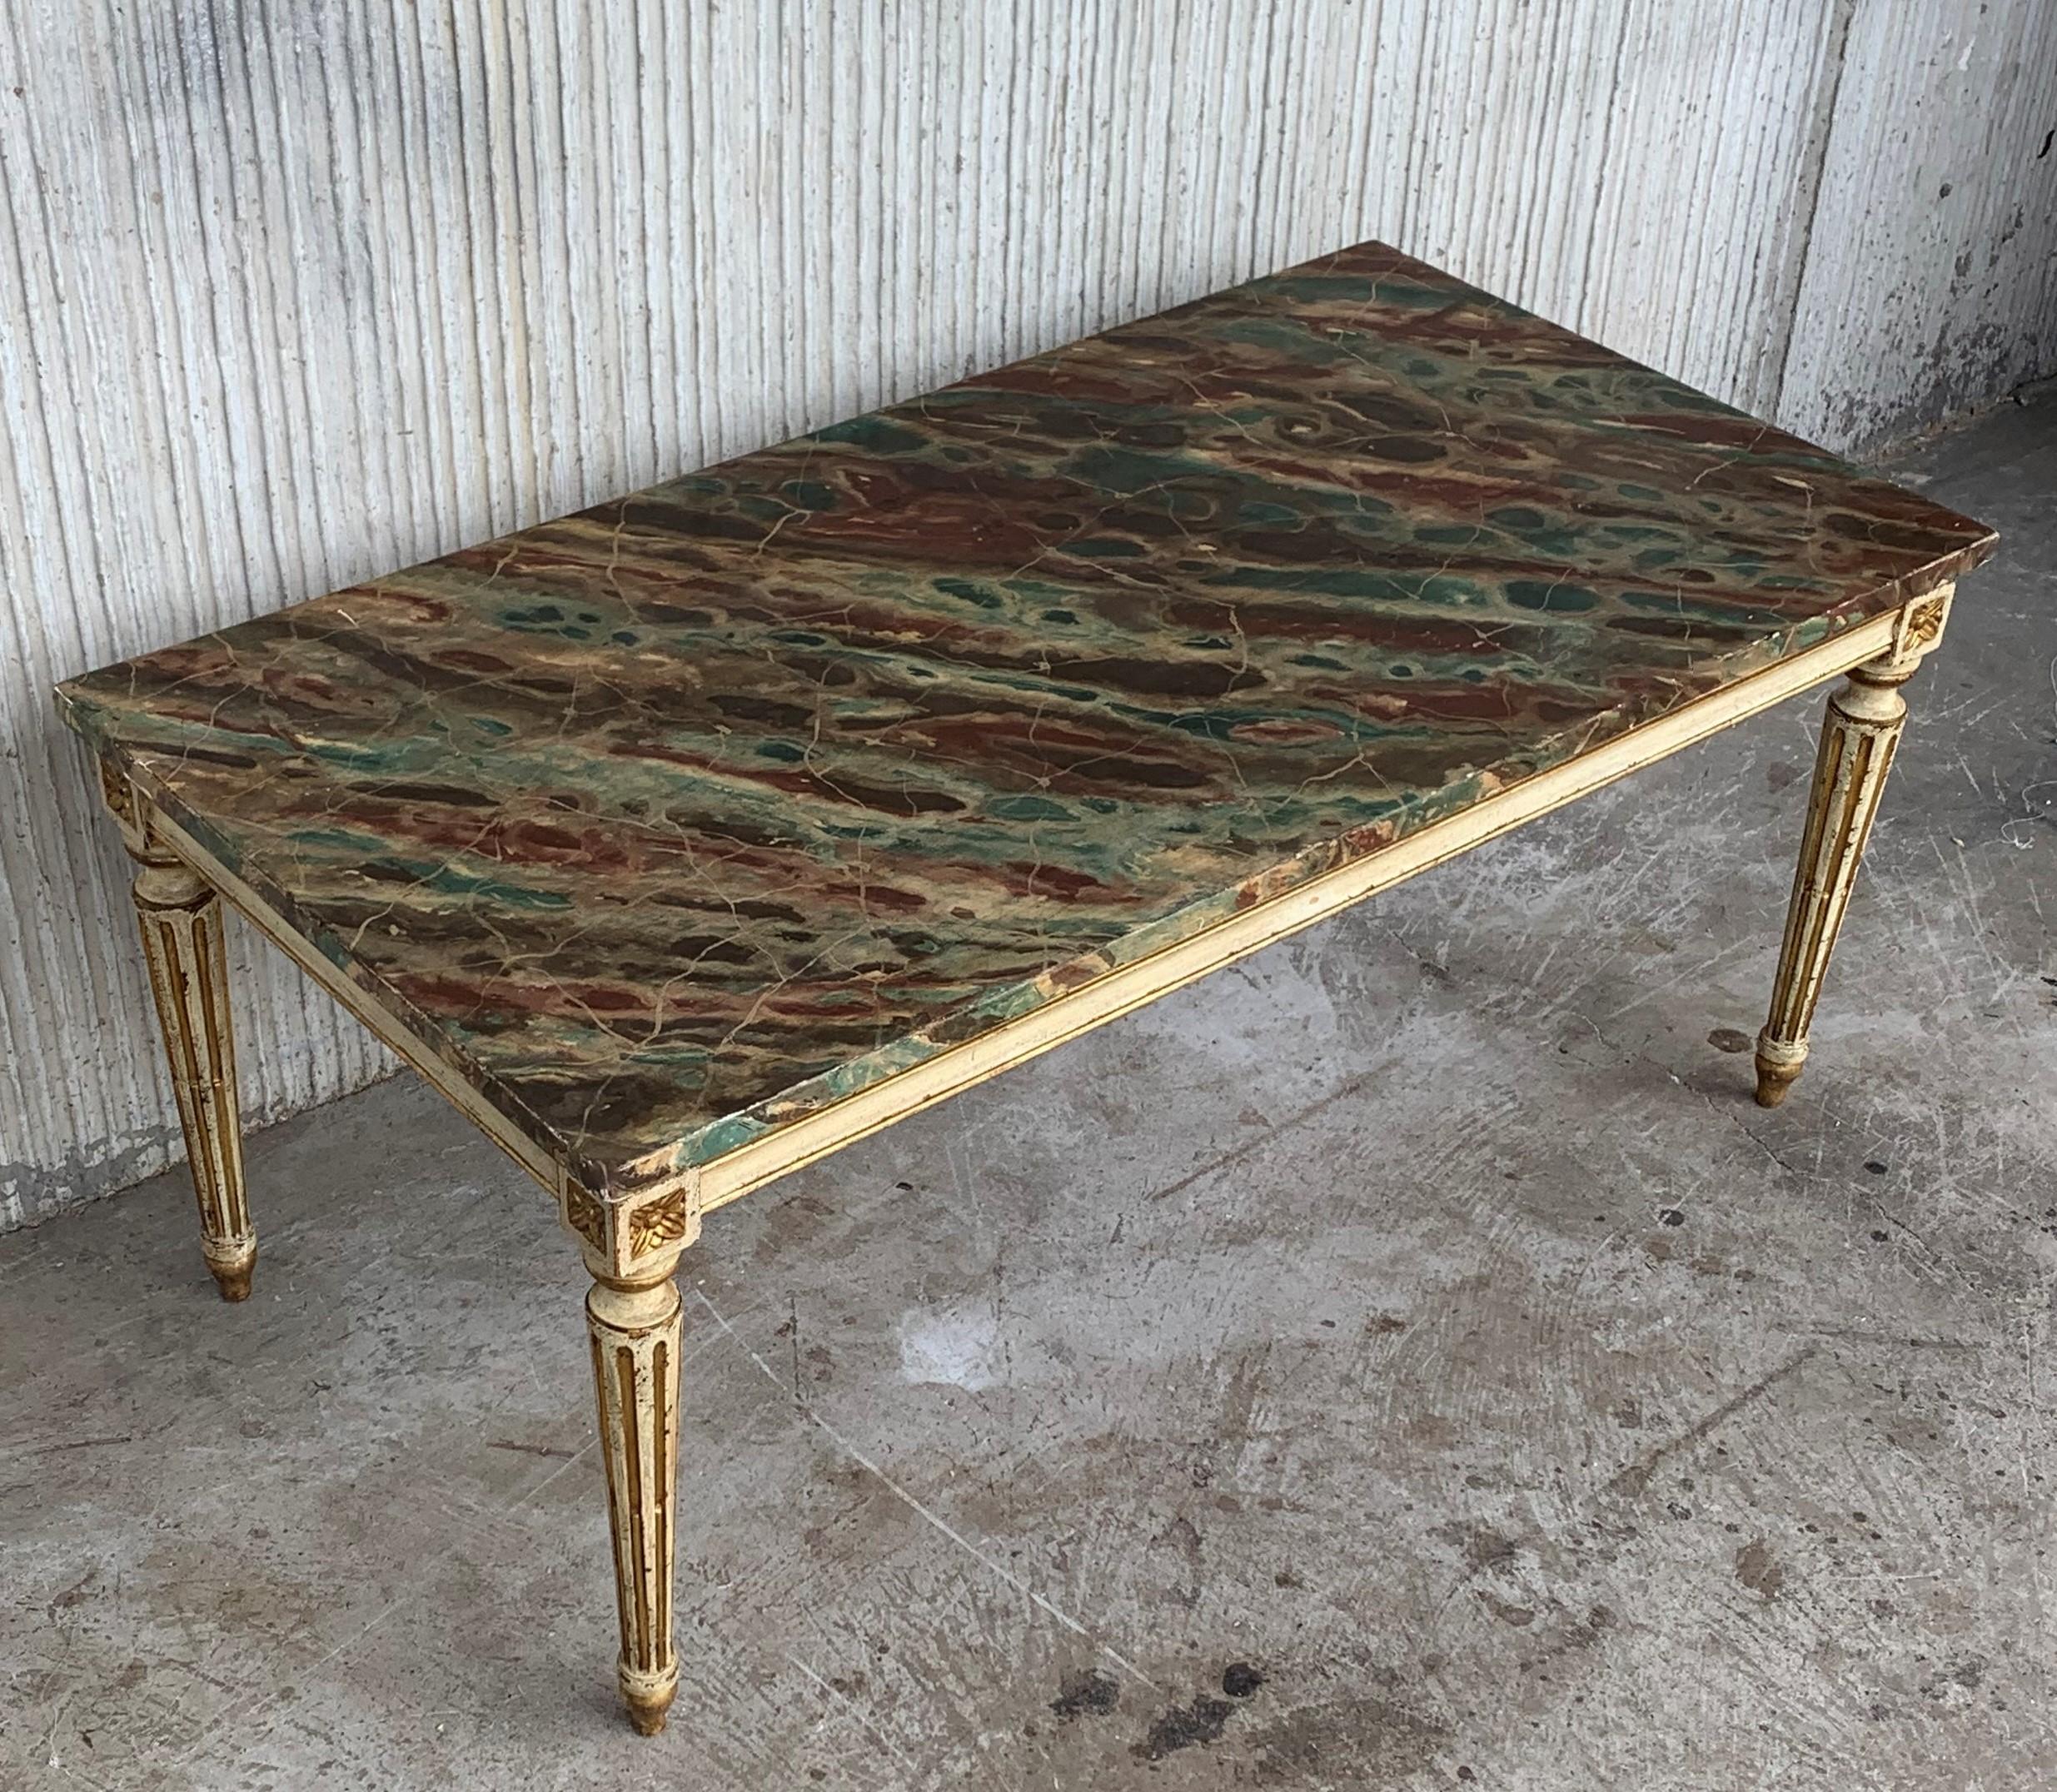 Ultra 'old world' sophistication radiates from this magnificent light green painted and parcel gilt rectangular coffee table. The table has a faux marble top over a gilt-embossed frieze and supported by square tapering legs with a similar motif. The